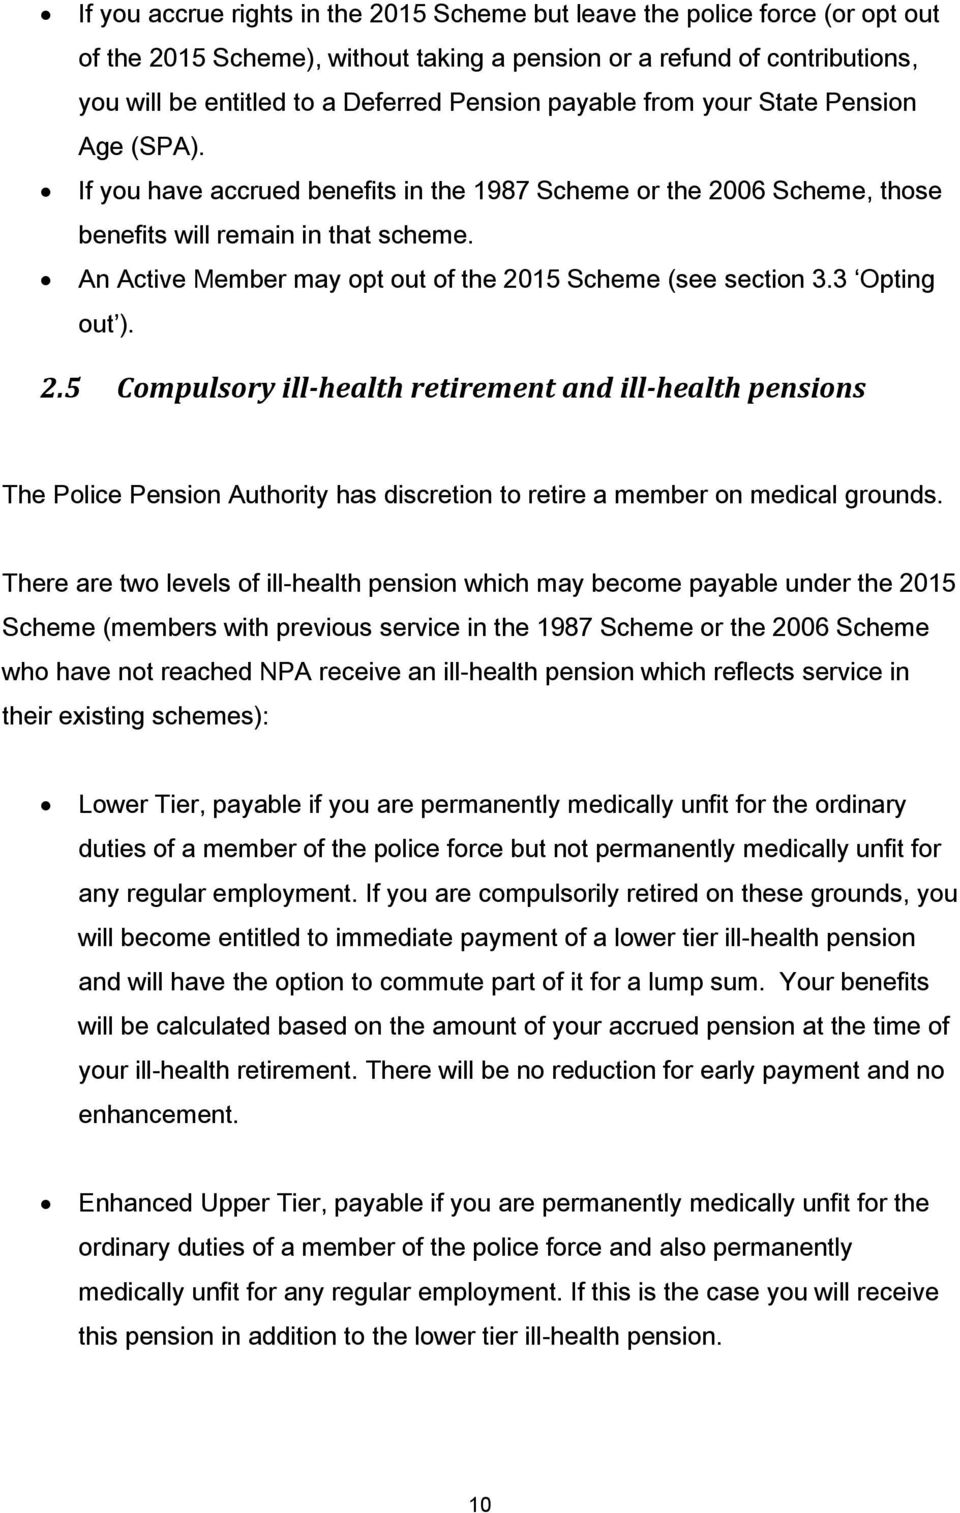 An Active Member may opt out of the 2015 Scheme (see section 3.3 Opting out ). 2.5 Compulsory ill-health retirement and ill-health pensions The Police Pension Authority has discretion to retire a member on medical grounds.